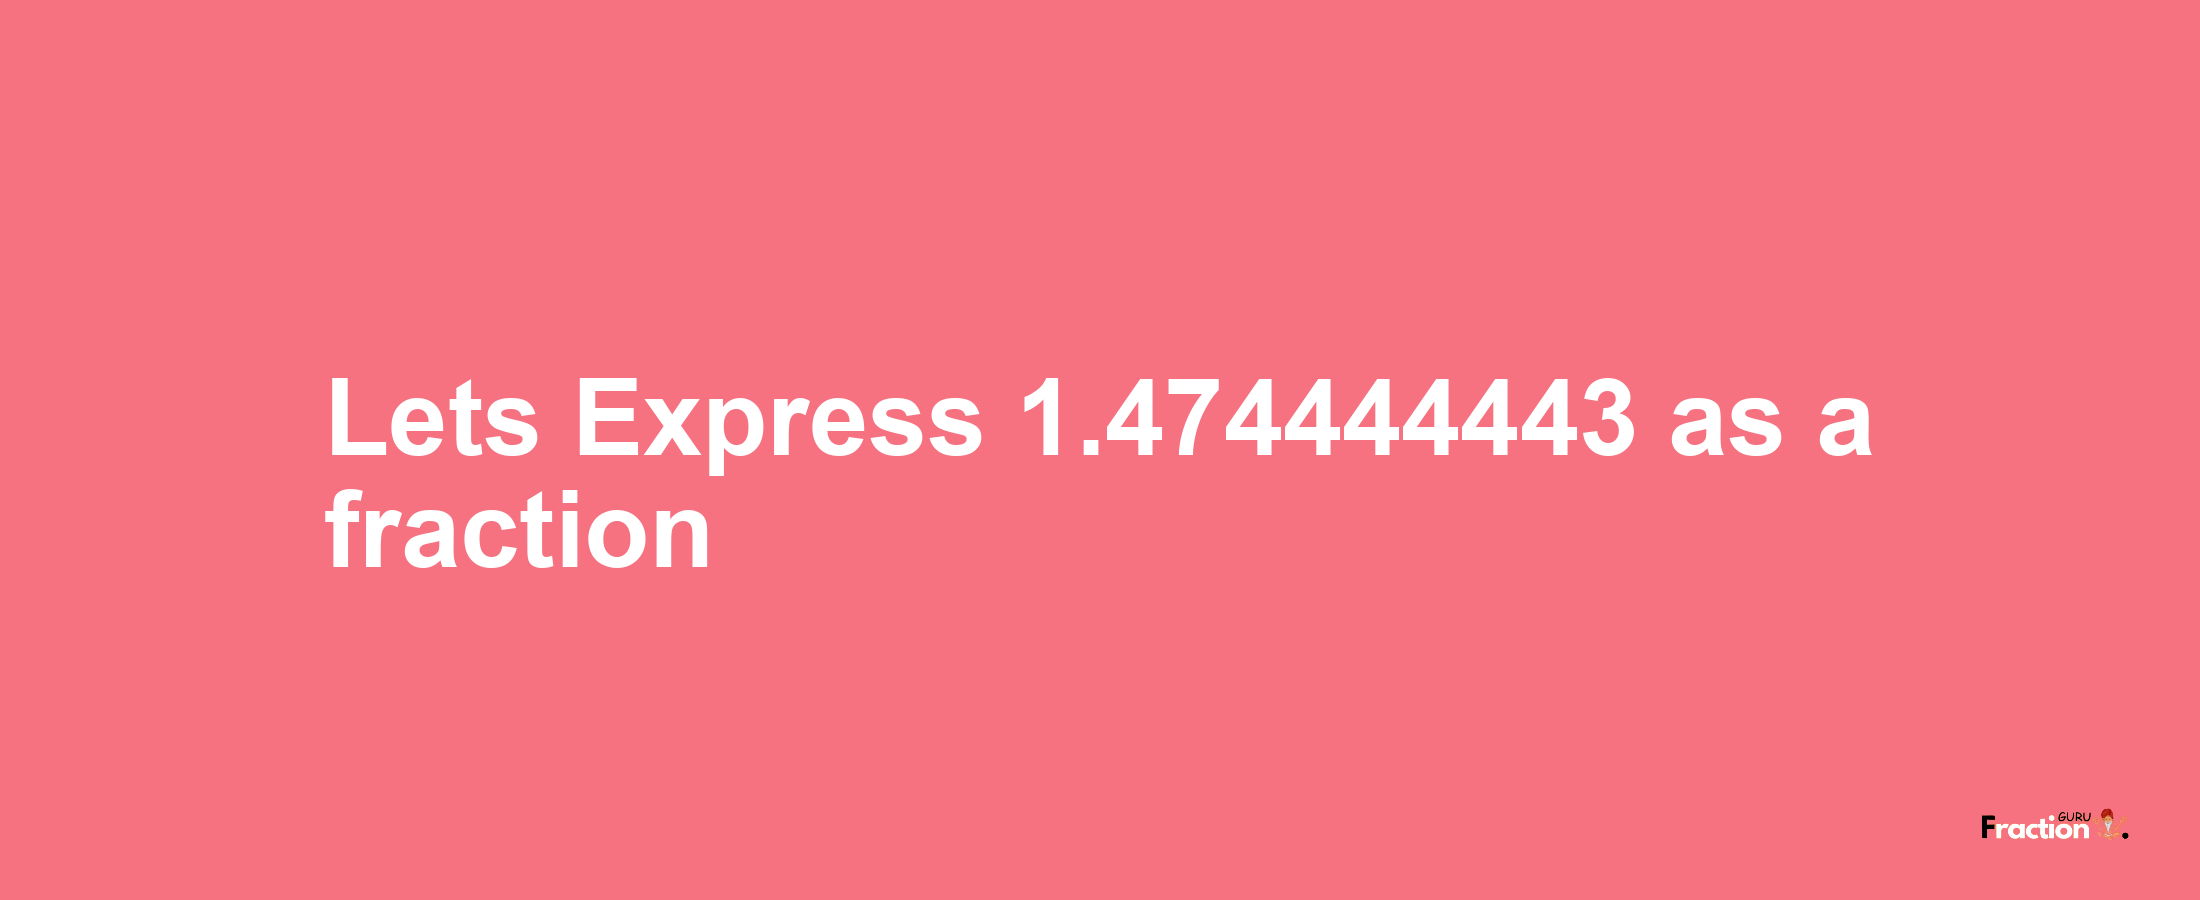 Lets Express 1.474444443 as afraction